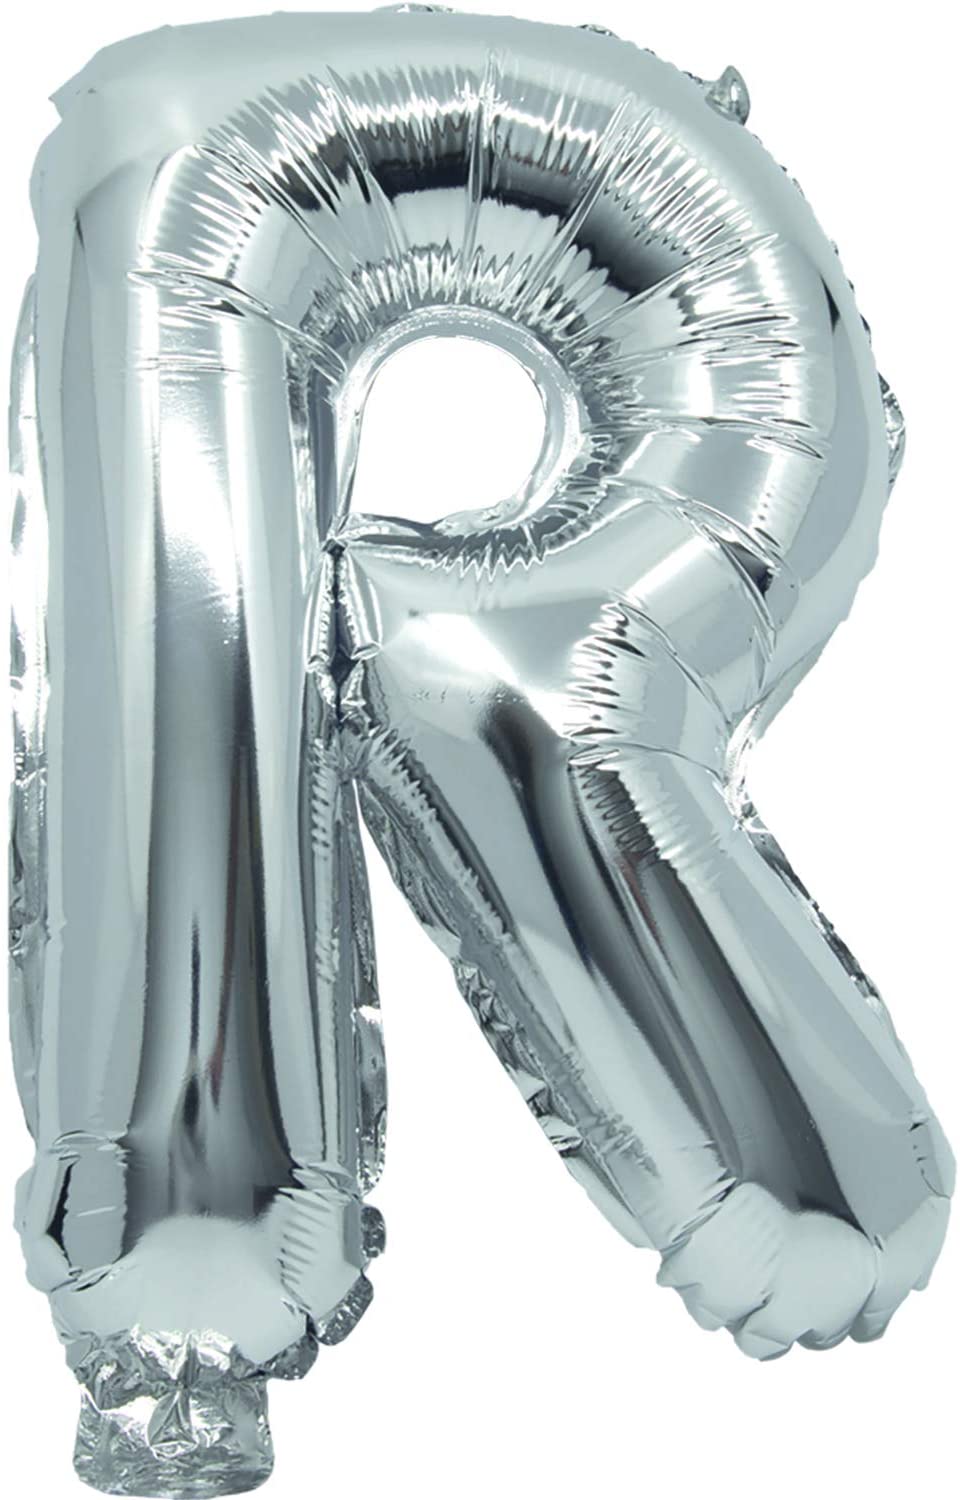 BALLOON SILVER FOIL 32 cm LETTER R AND STRAW